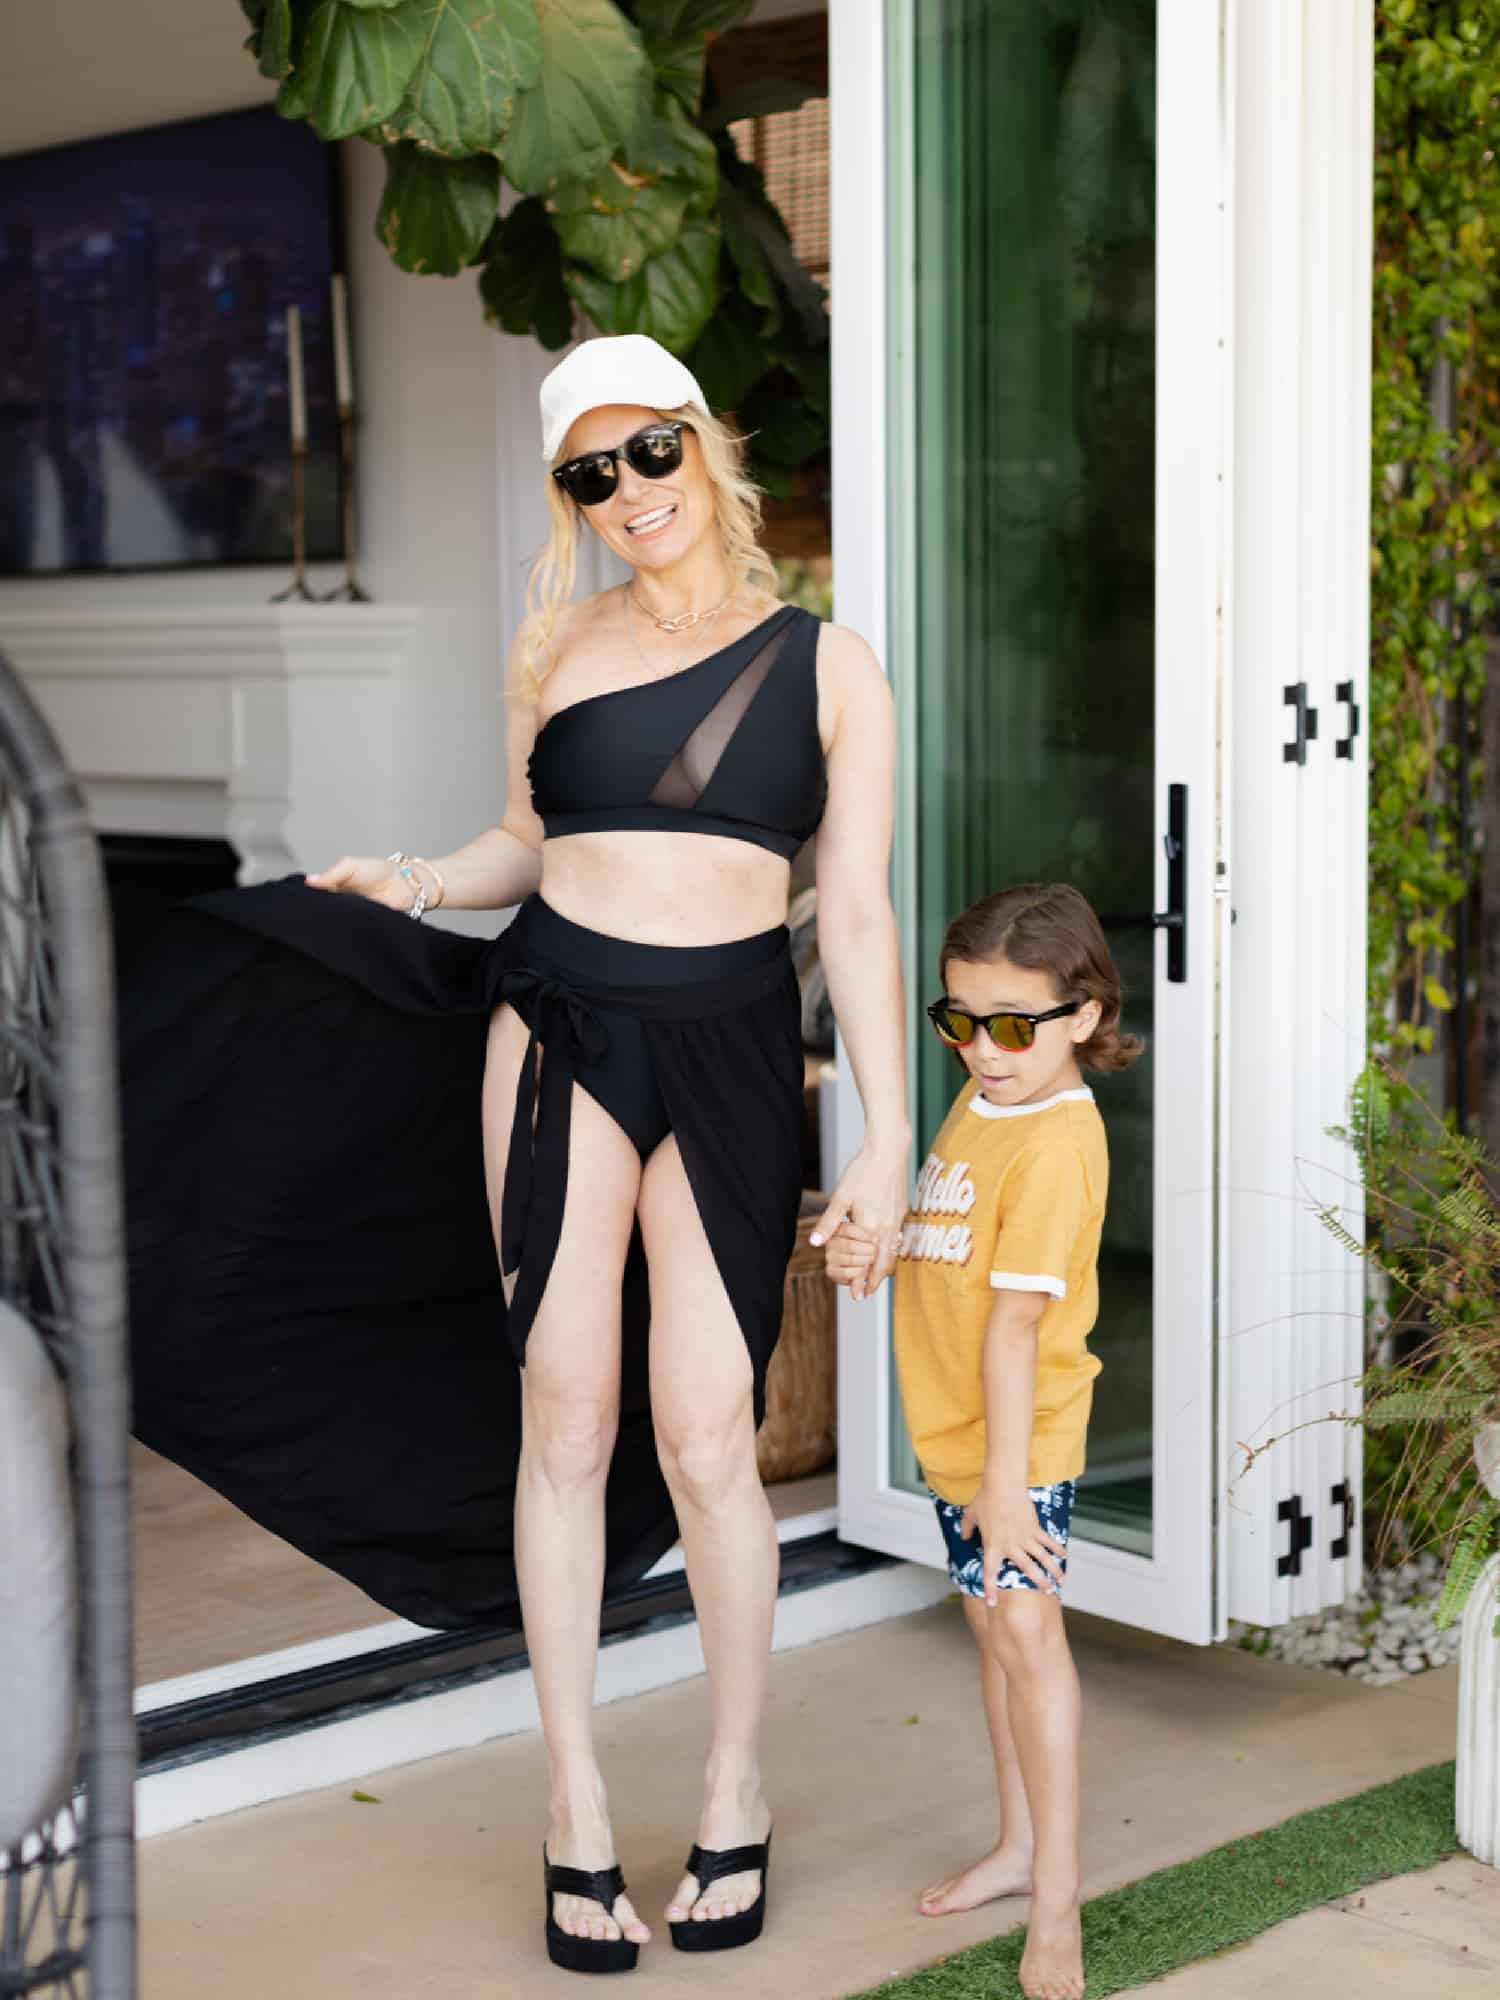 Mother and young son wearing swimsuits. The mom is wearing a black two-piece with a black wrap skirt. She is also wearing a white ball cap and sun glasses. The boy is holding her hand and striking a cute pose. He's wearing blue swim trunks with a yellow t-shirt from KOHL'S.